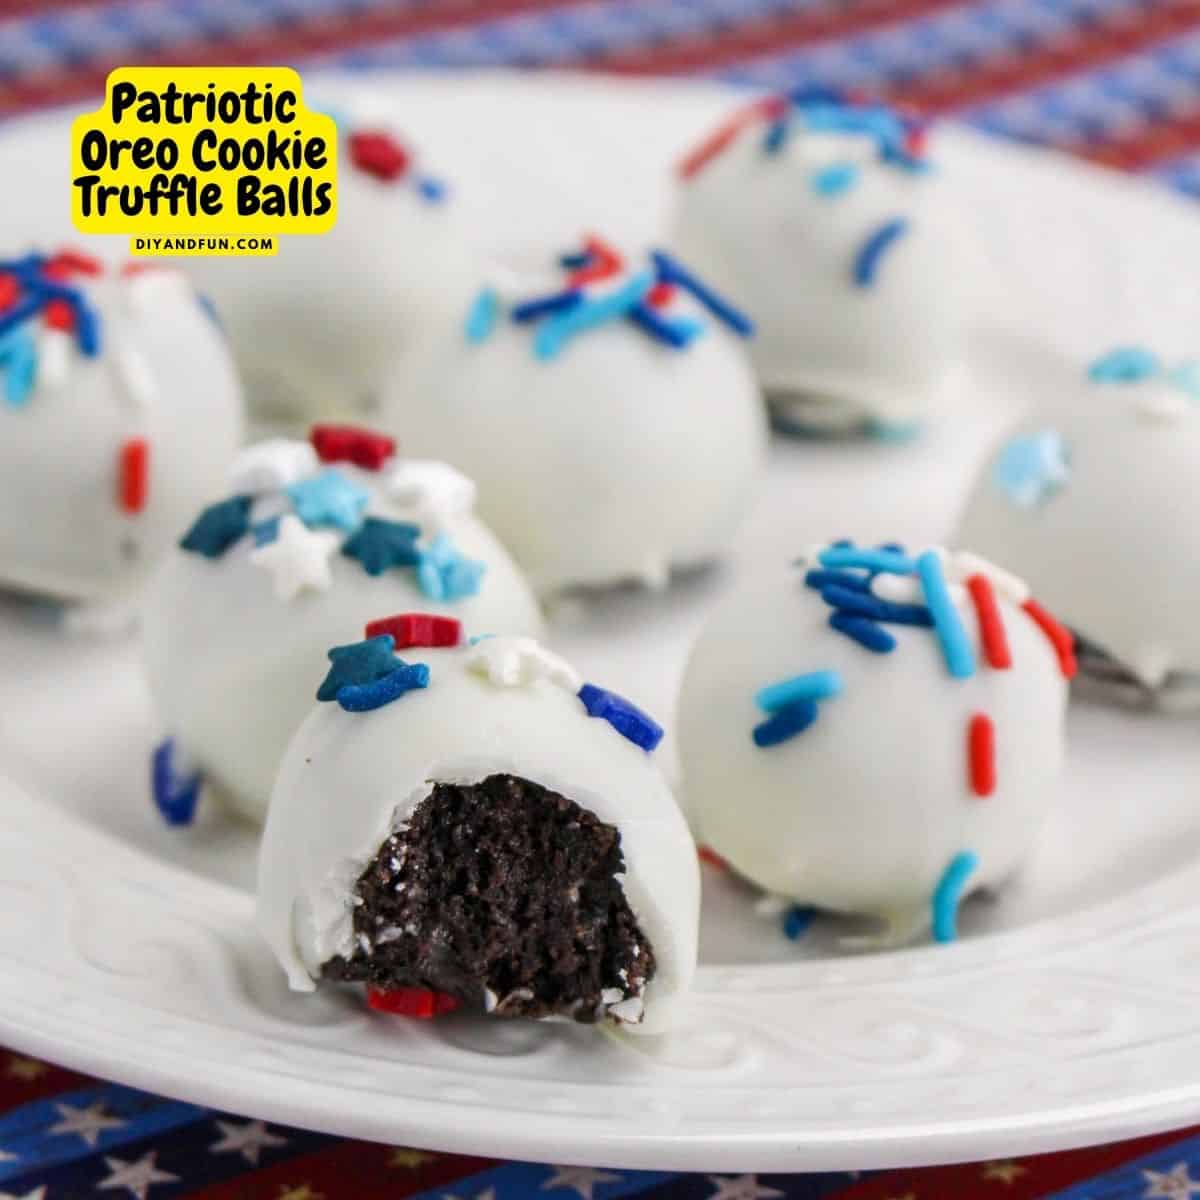 Patriotic Oreo Cookie Truffle Balls, a simple no bake dessert recipe featuring sandwich cookies and red, white, and blue sprinkles.